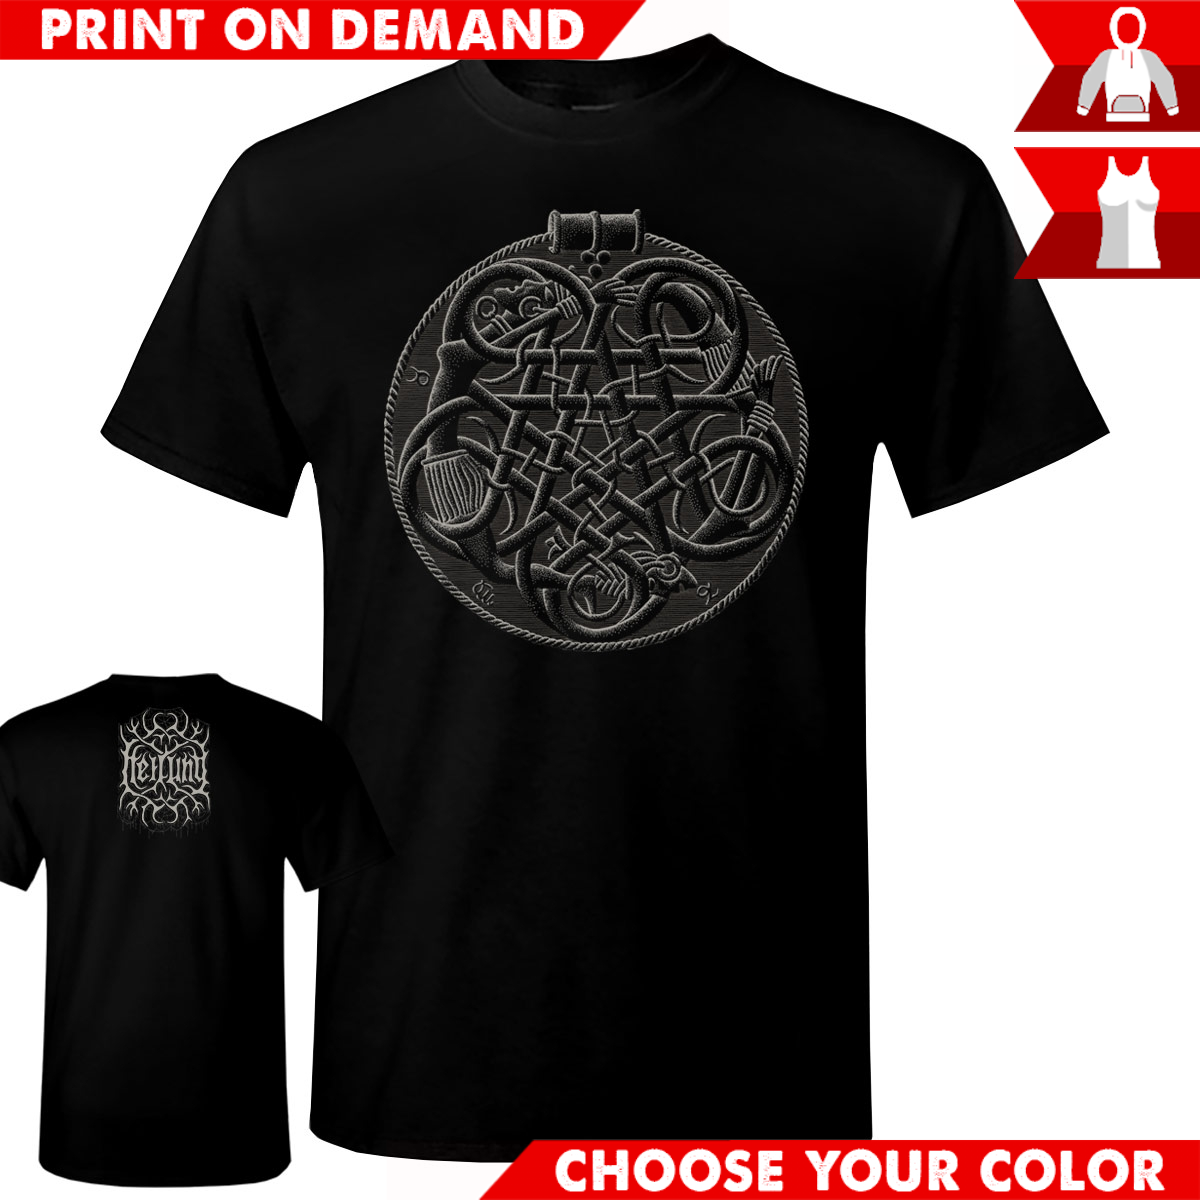 Ace Of Coins - Print on demand